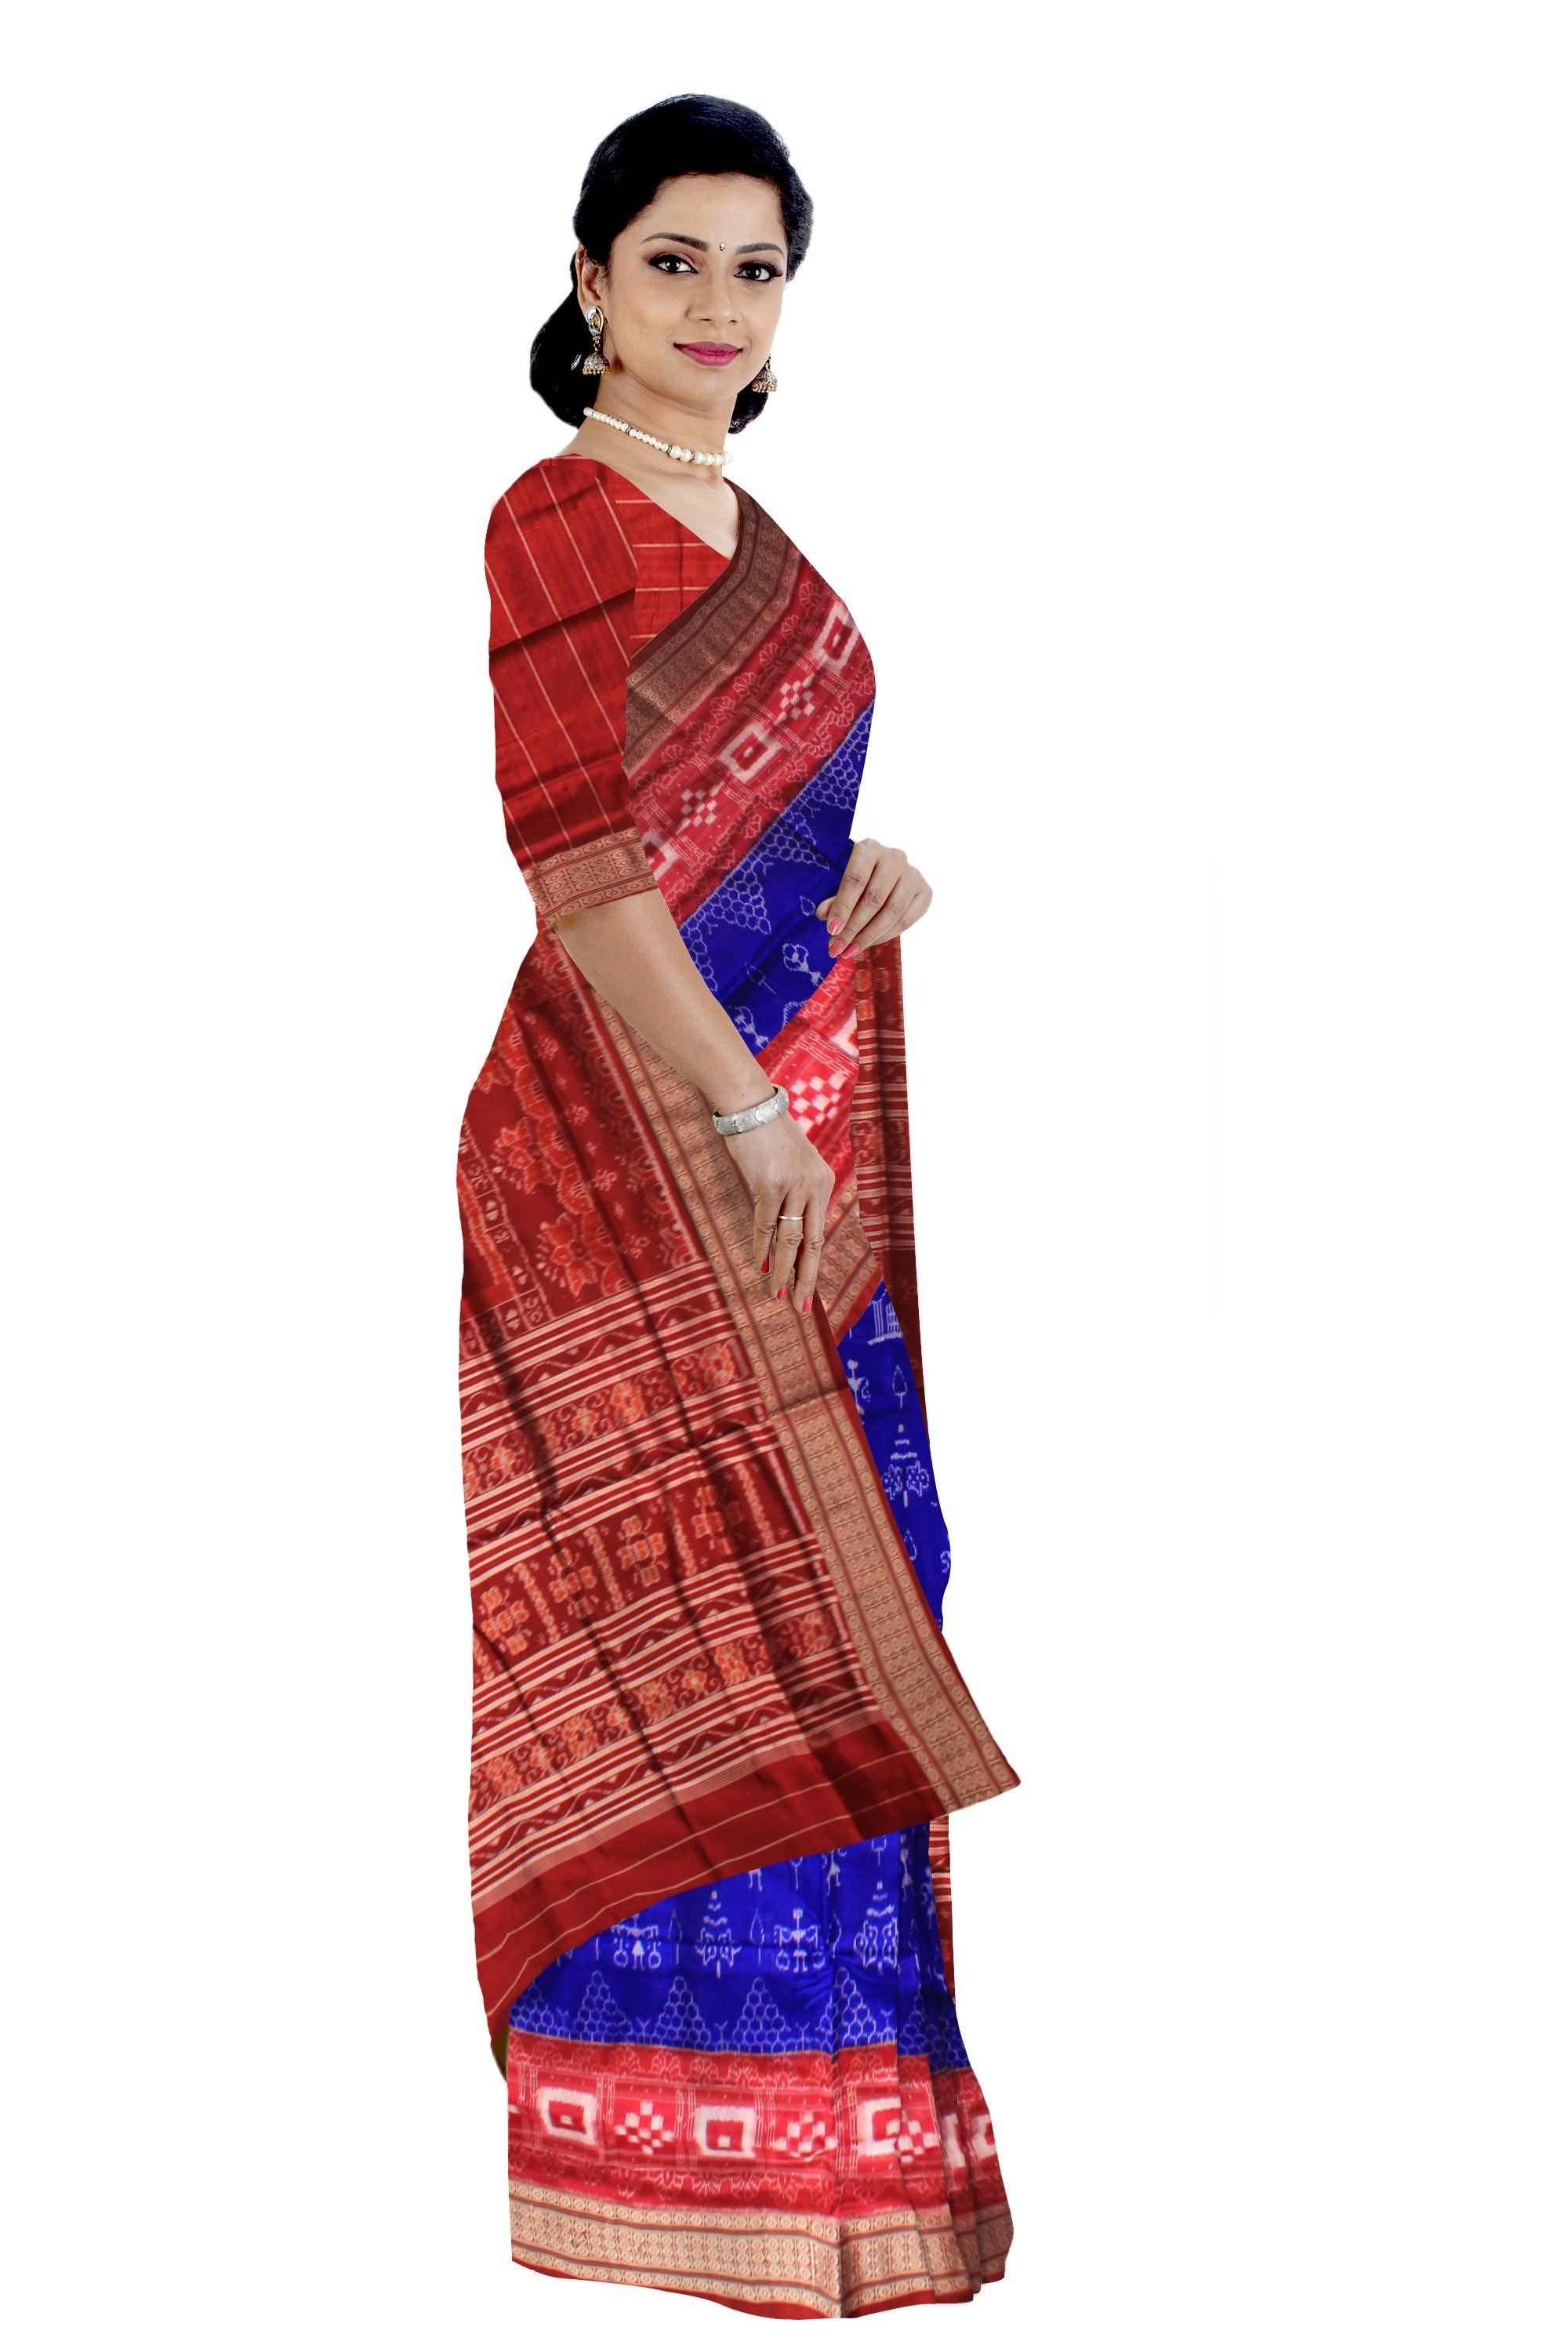 PASAPALI WITH TERRACOTTA PATTERN  PURE PATA SAREE  IN DEEP BLUE AND RED COLOR, COMES WITH BLOUSE PIECE. - Koshali Arts & Crafts Enterprise